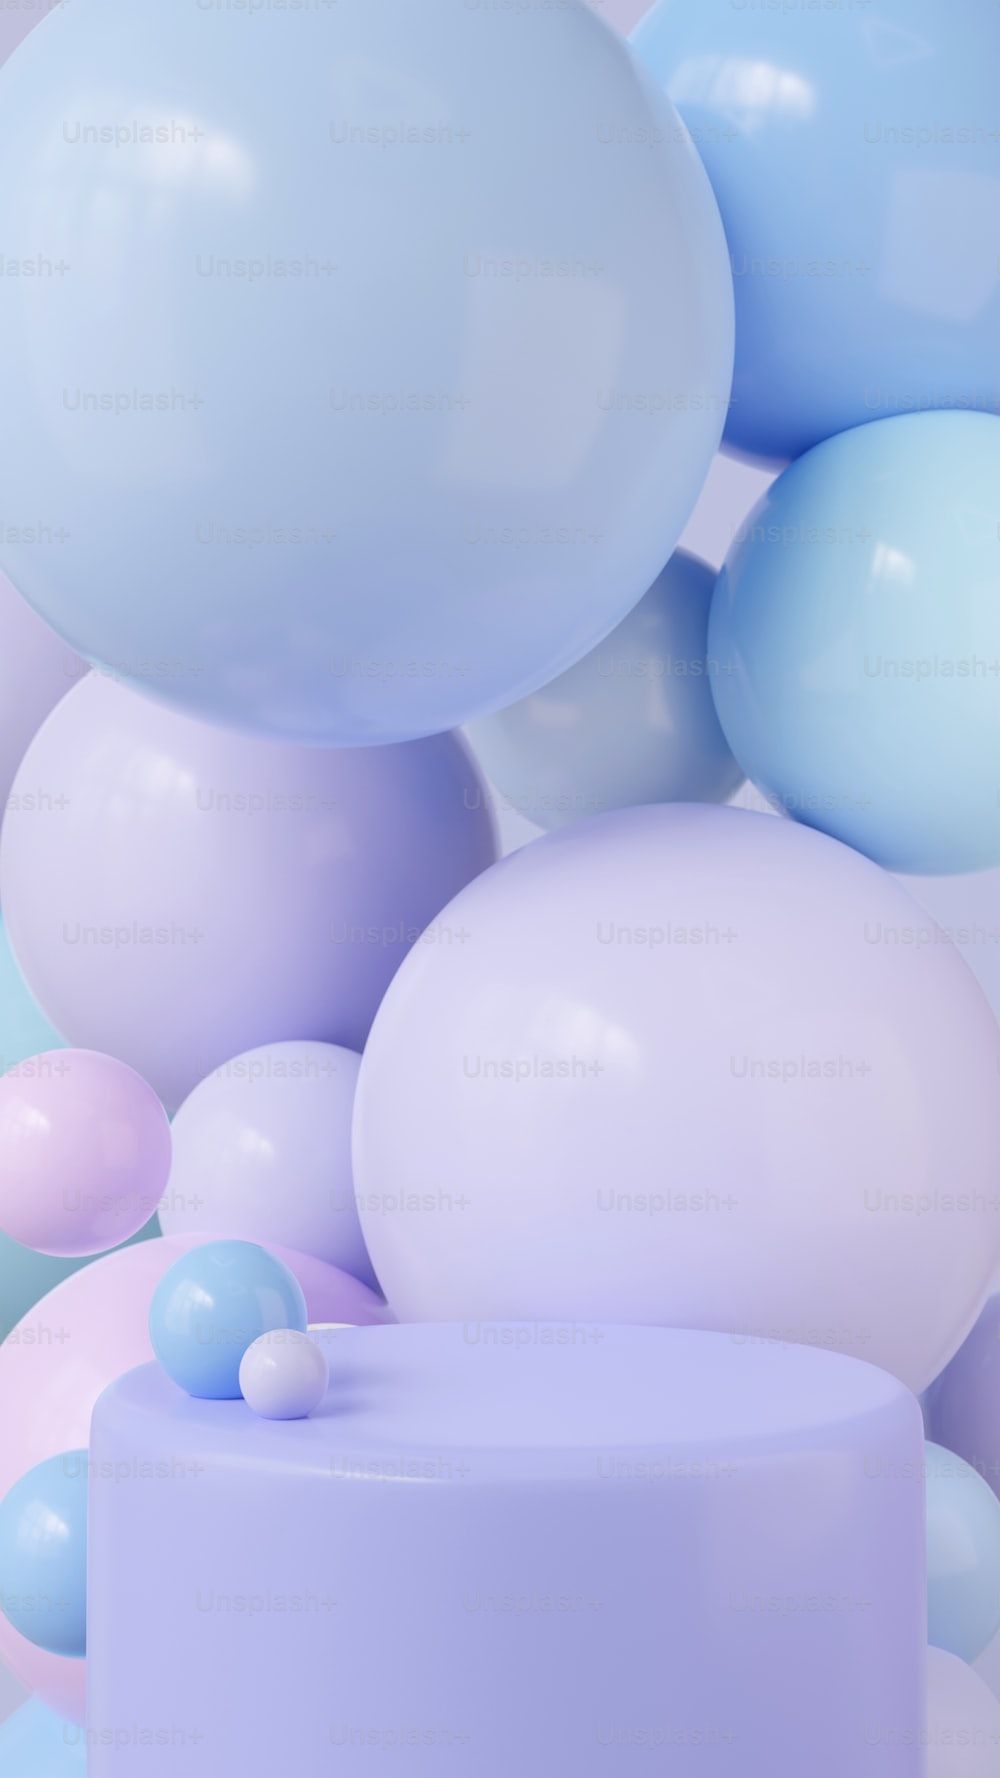 A pile of blue, purple and pink balloons - Balloons